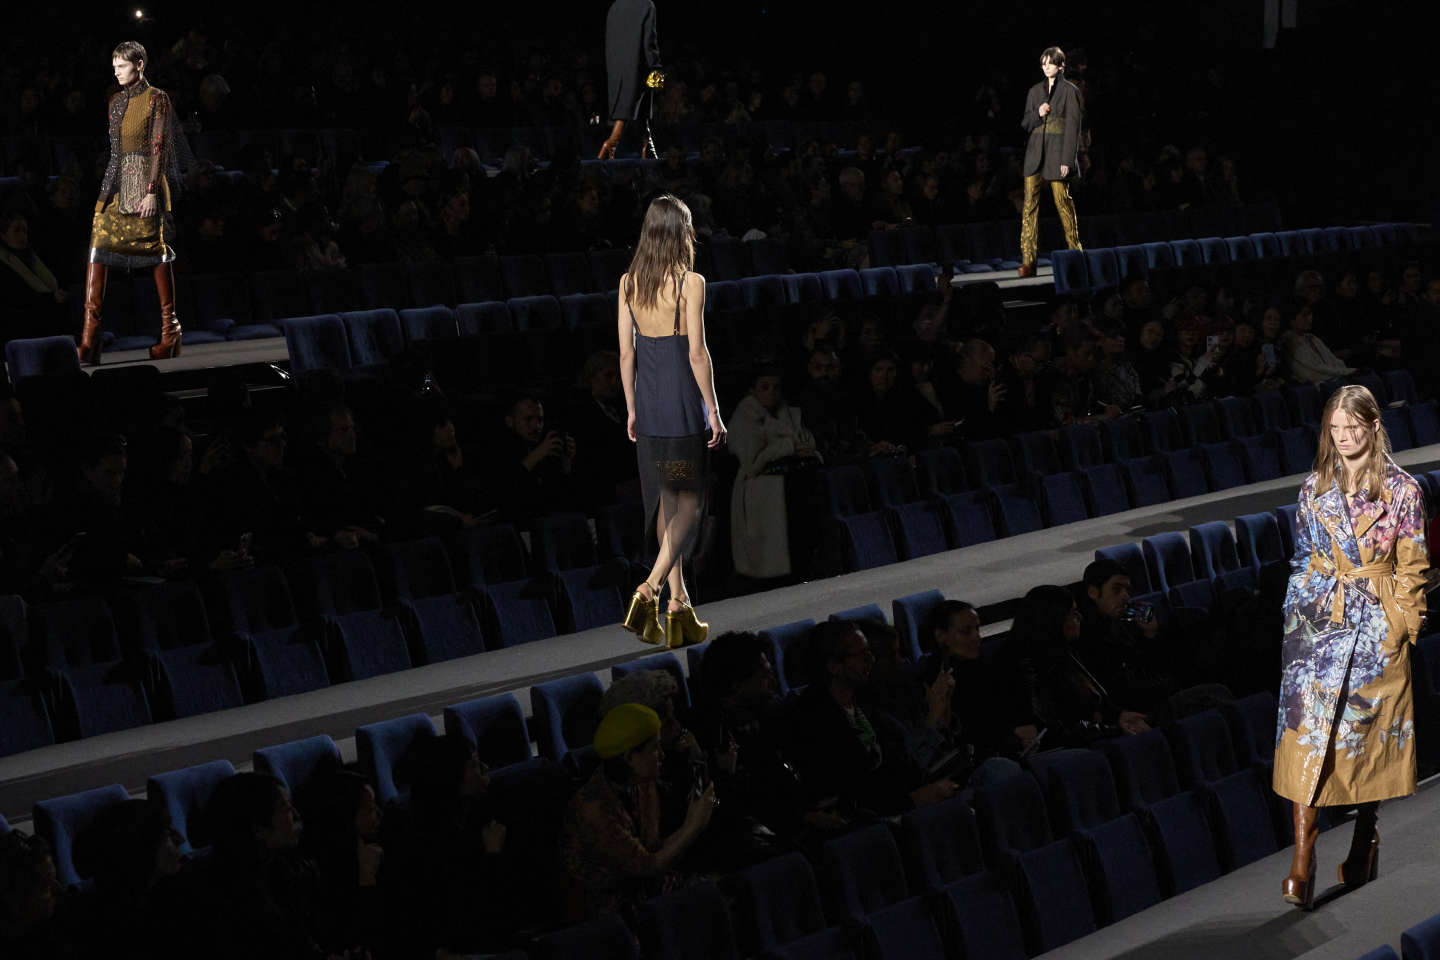 At Paris Fashion Week, don’t bodies and sets go hand in hand?